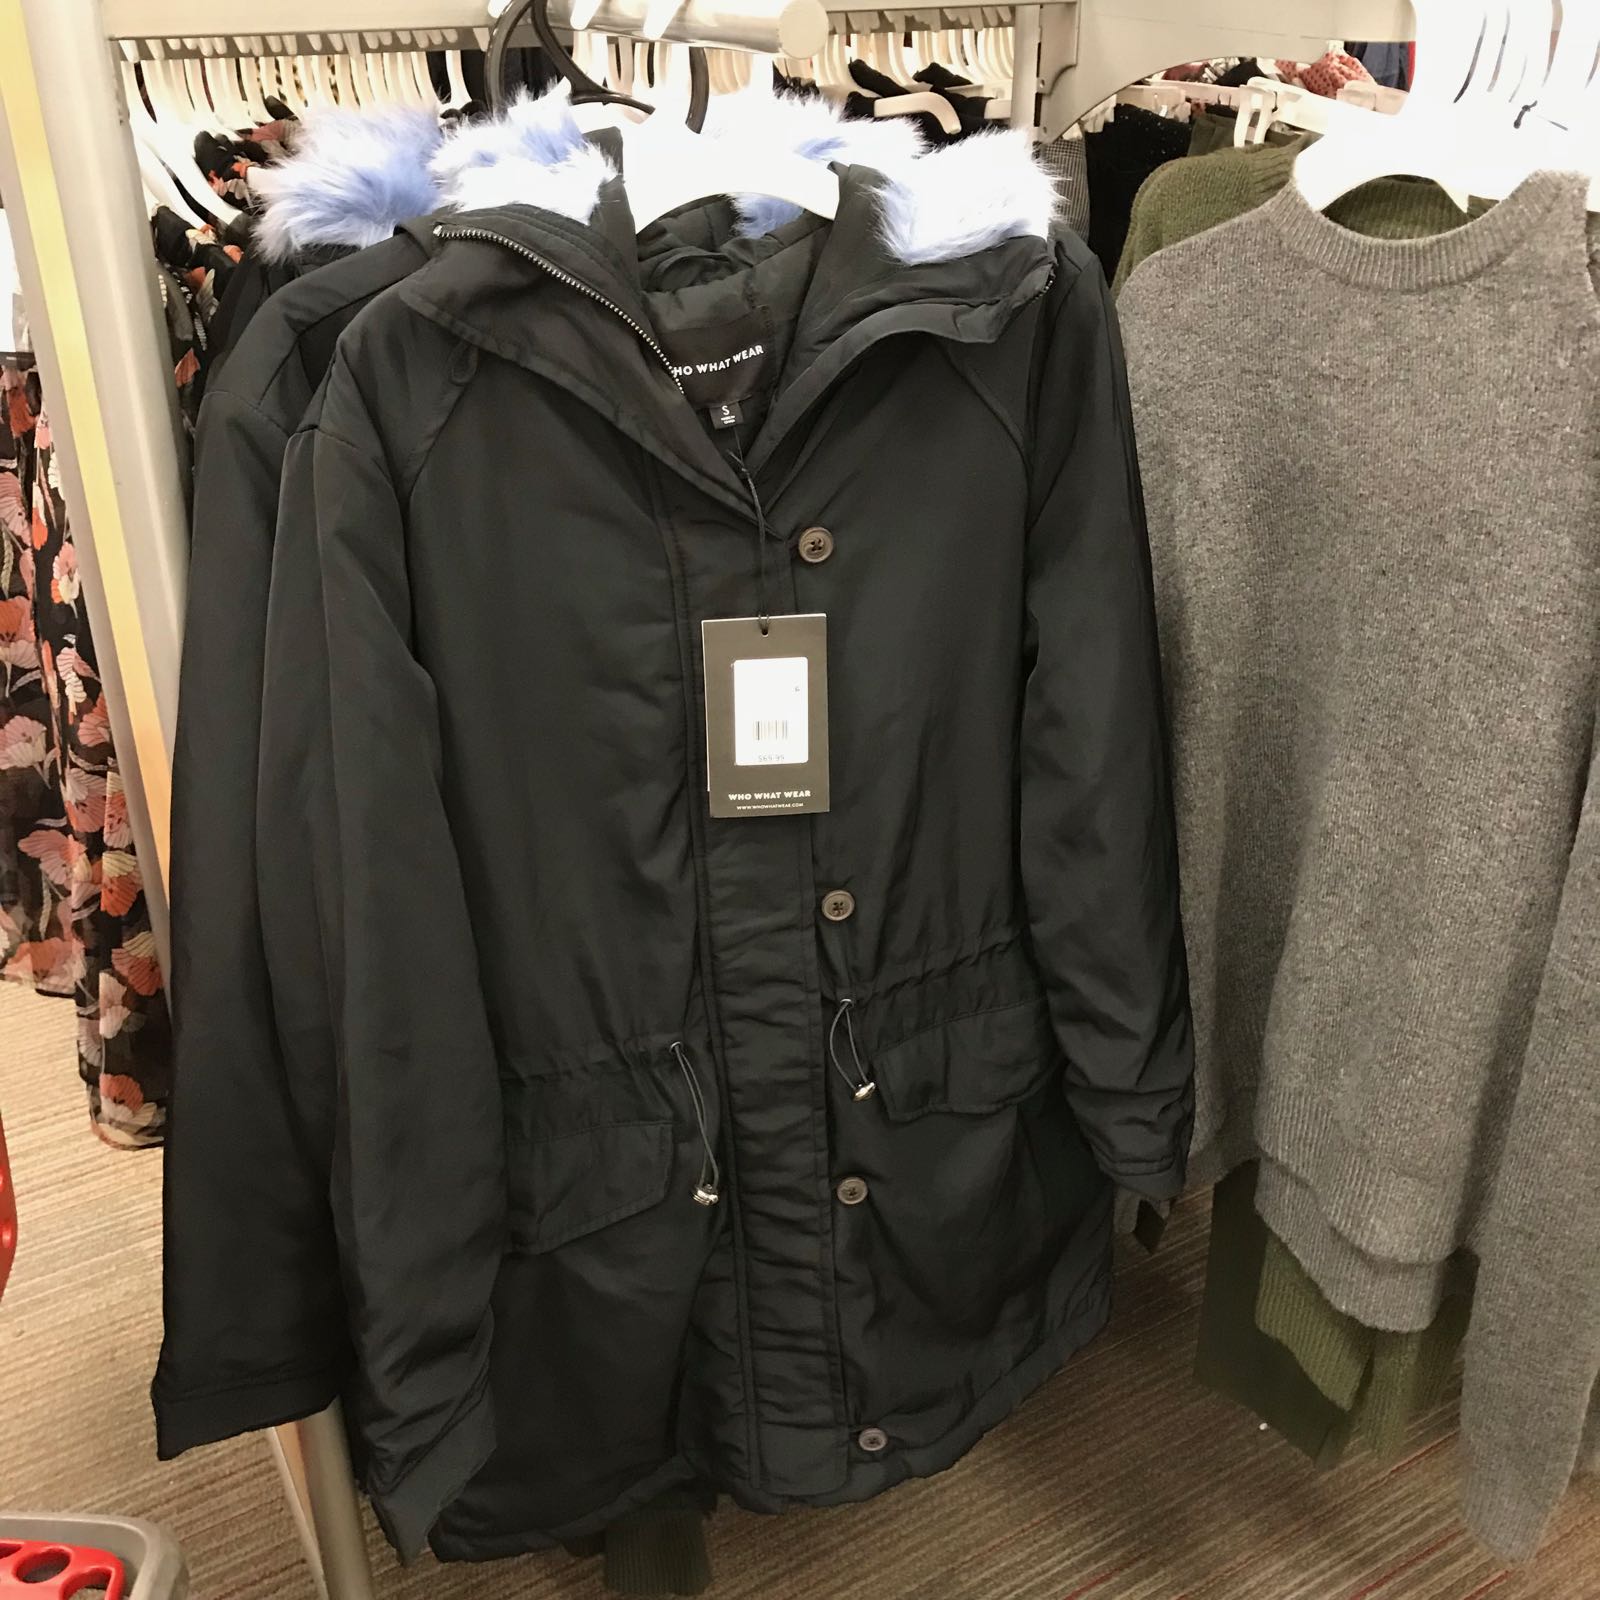 Who What Wear has the best fall styles at Target